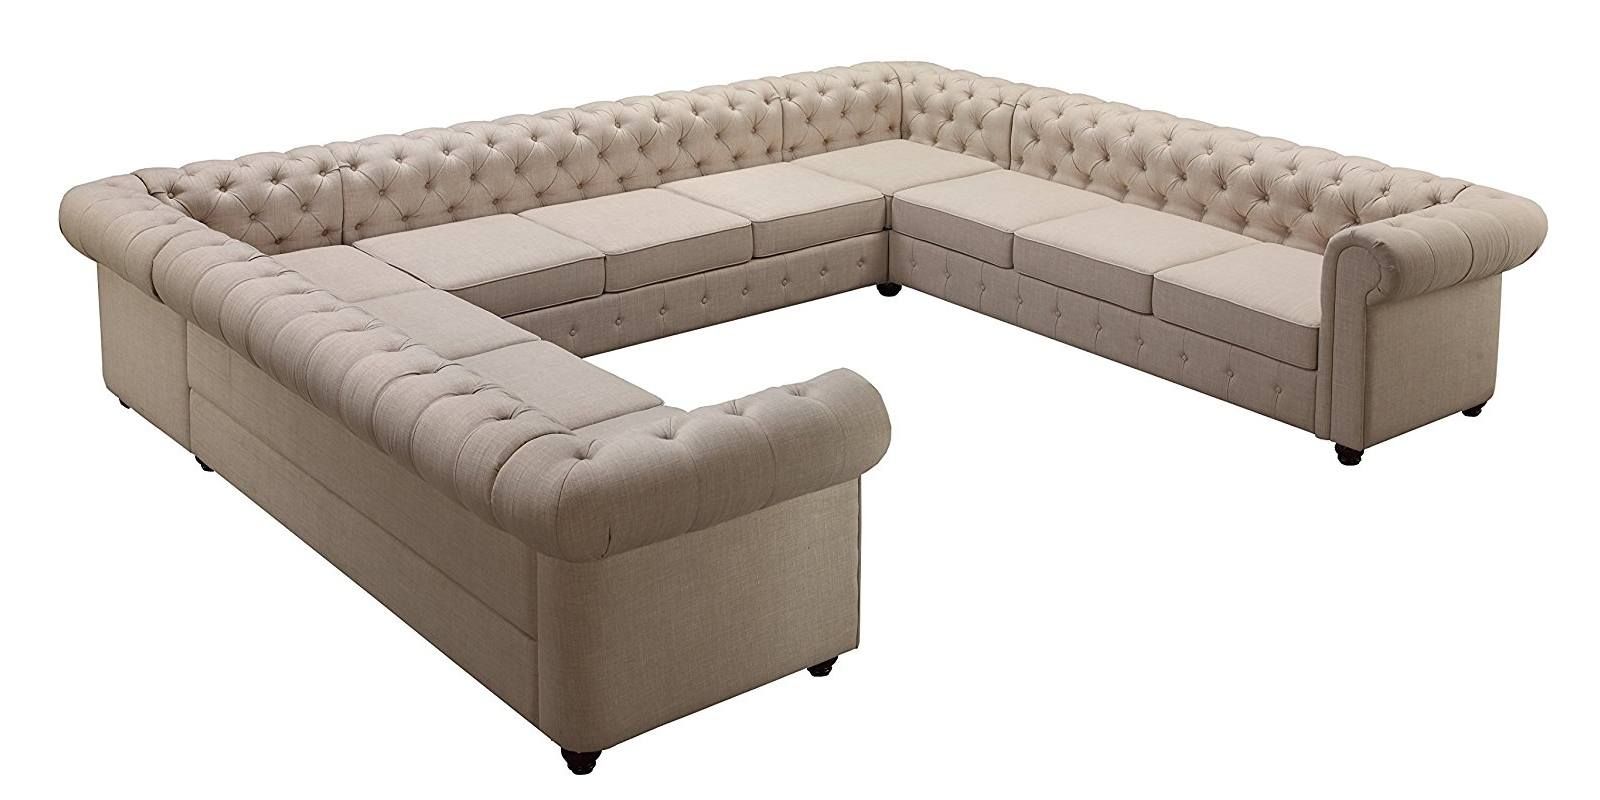 Impressive Fabric Corner Sofa In Beige Colour In C Shape – Dreamzz Furniture  | Online Furniture Shop Intended For U Shaped Couches In Beige (Photo 11 of 15)